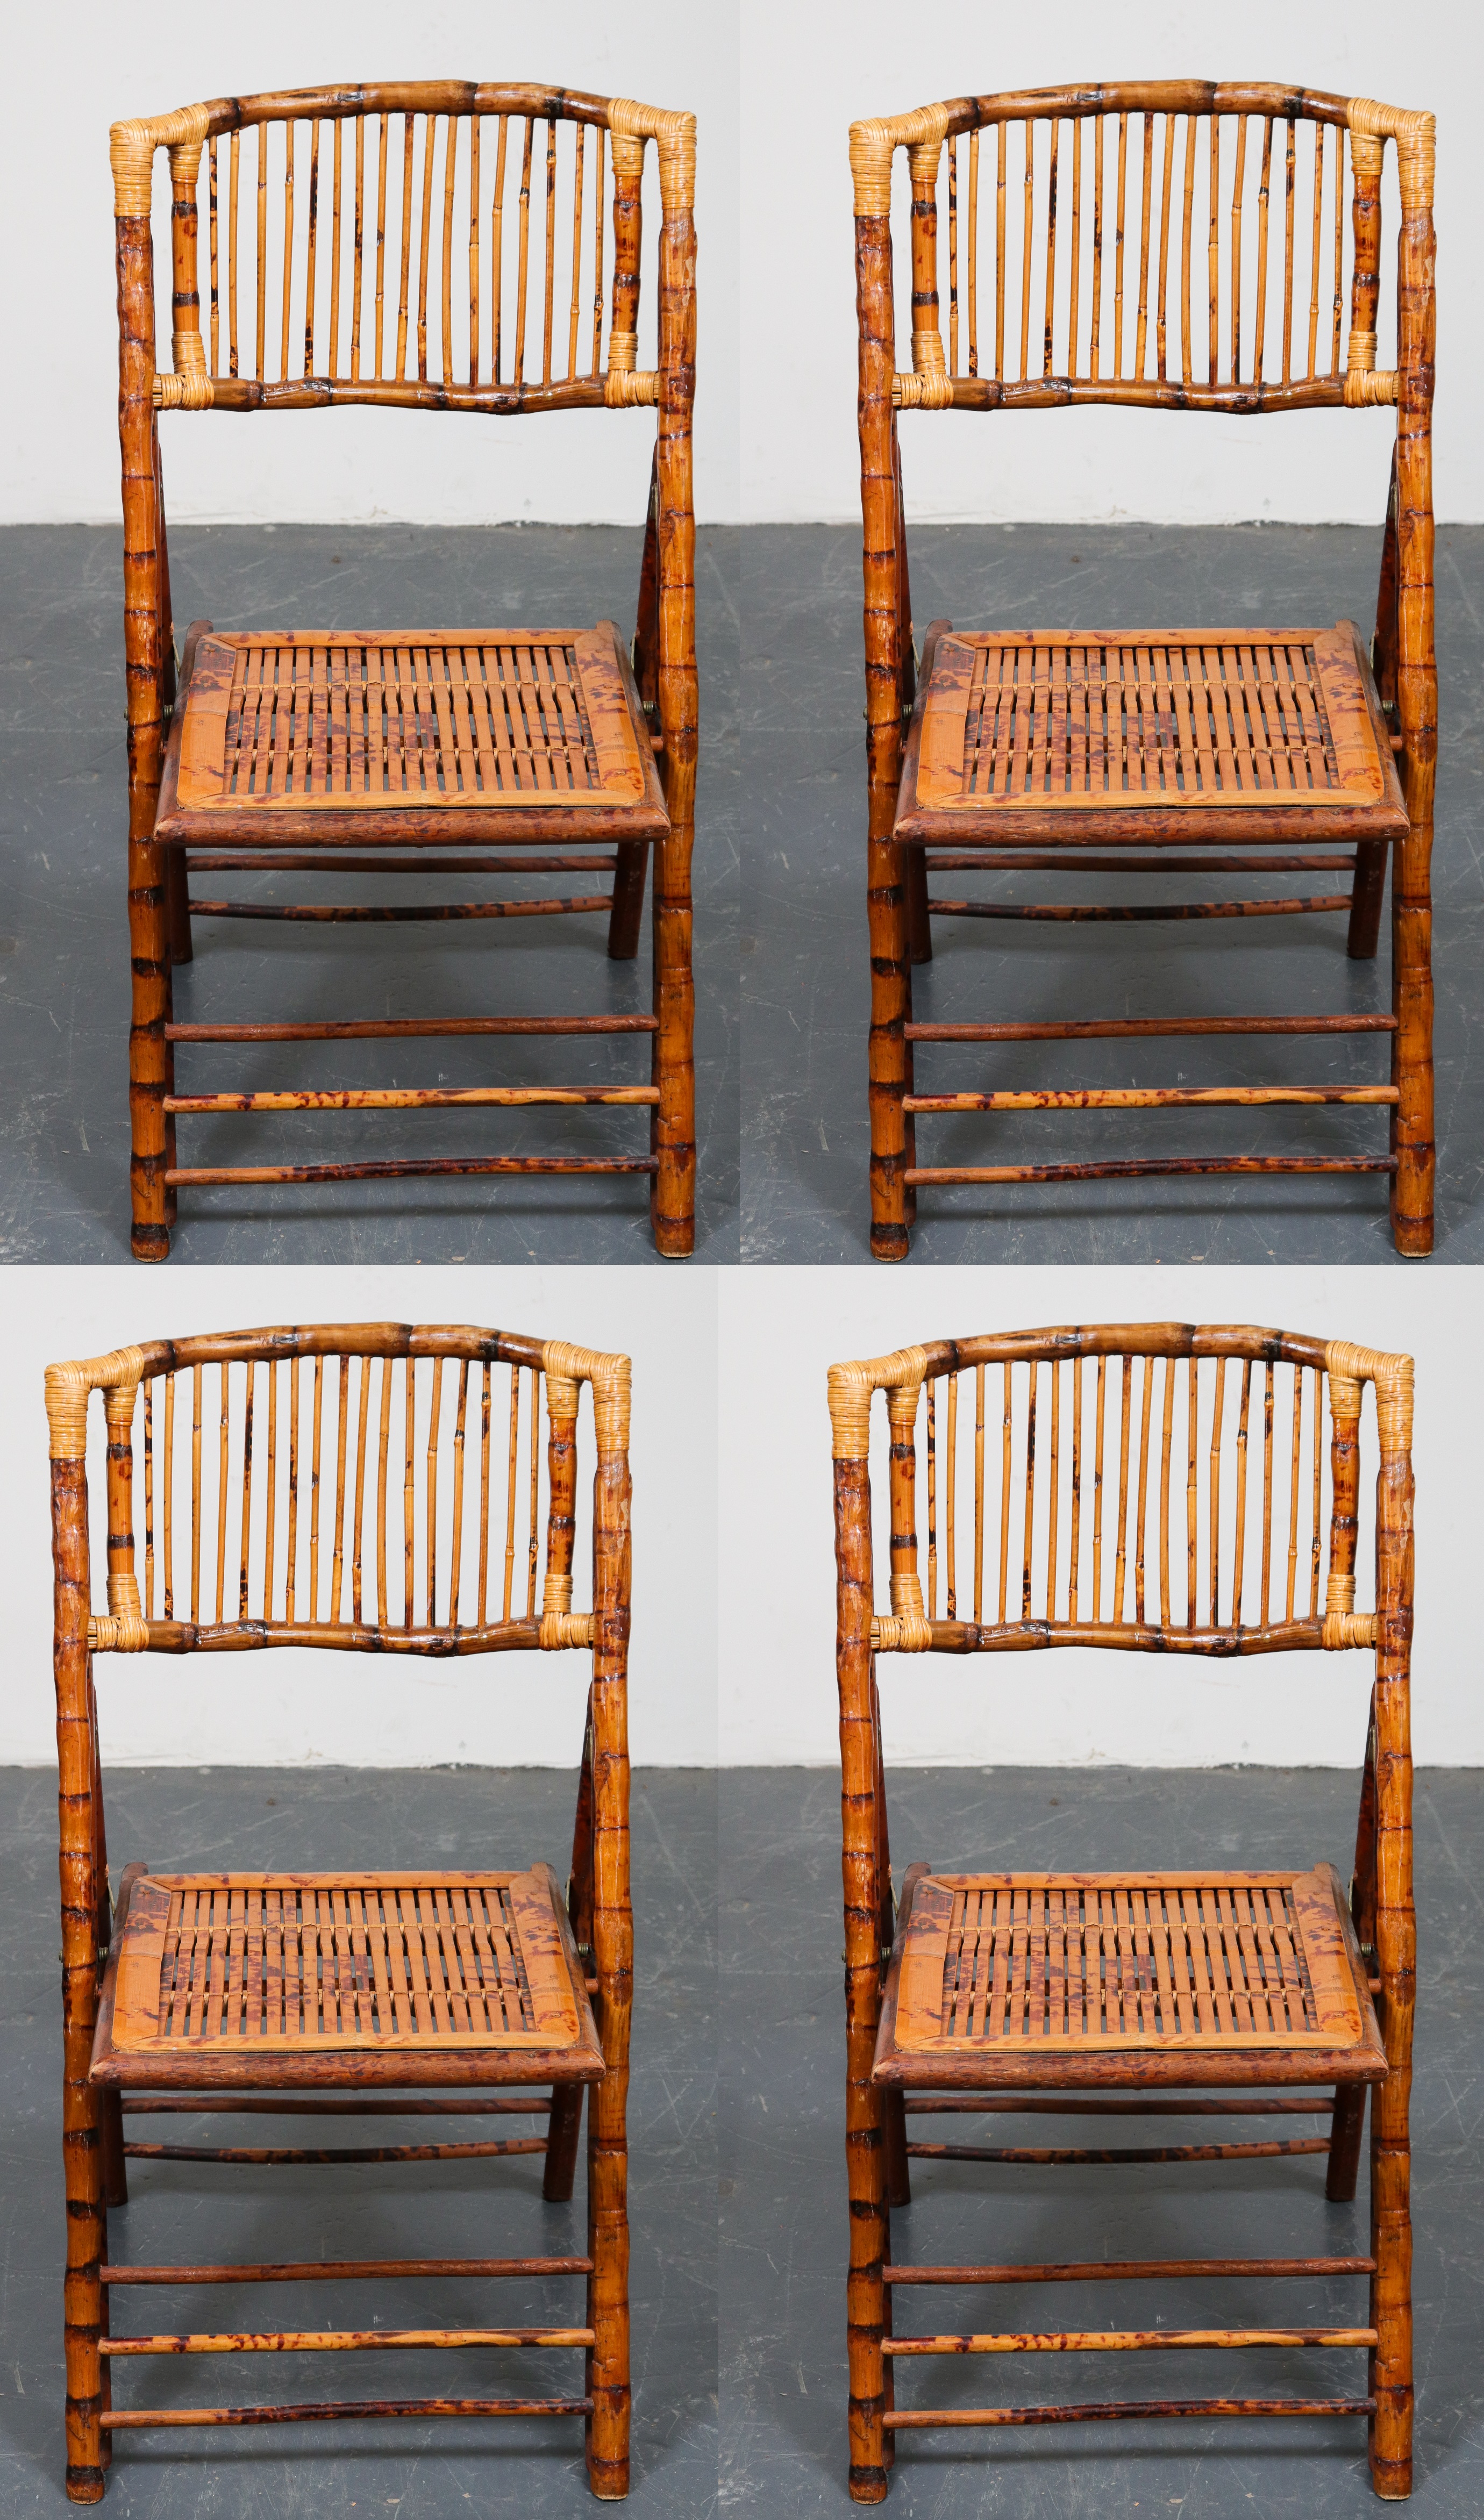 BAMBOO FOLDING CHAIRS SET OF 4 3c362a